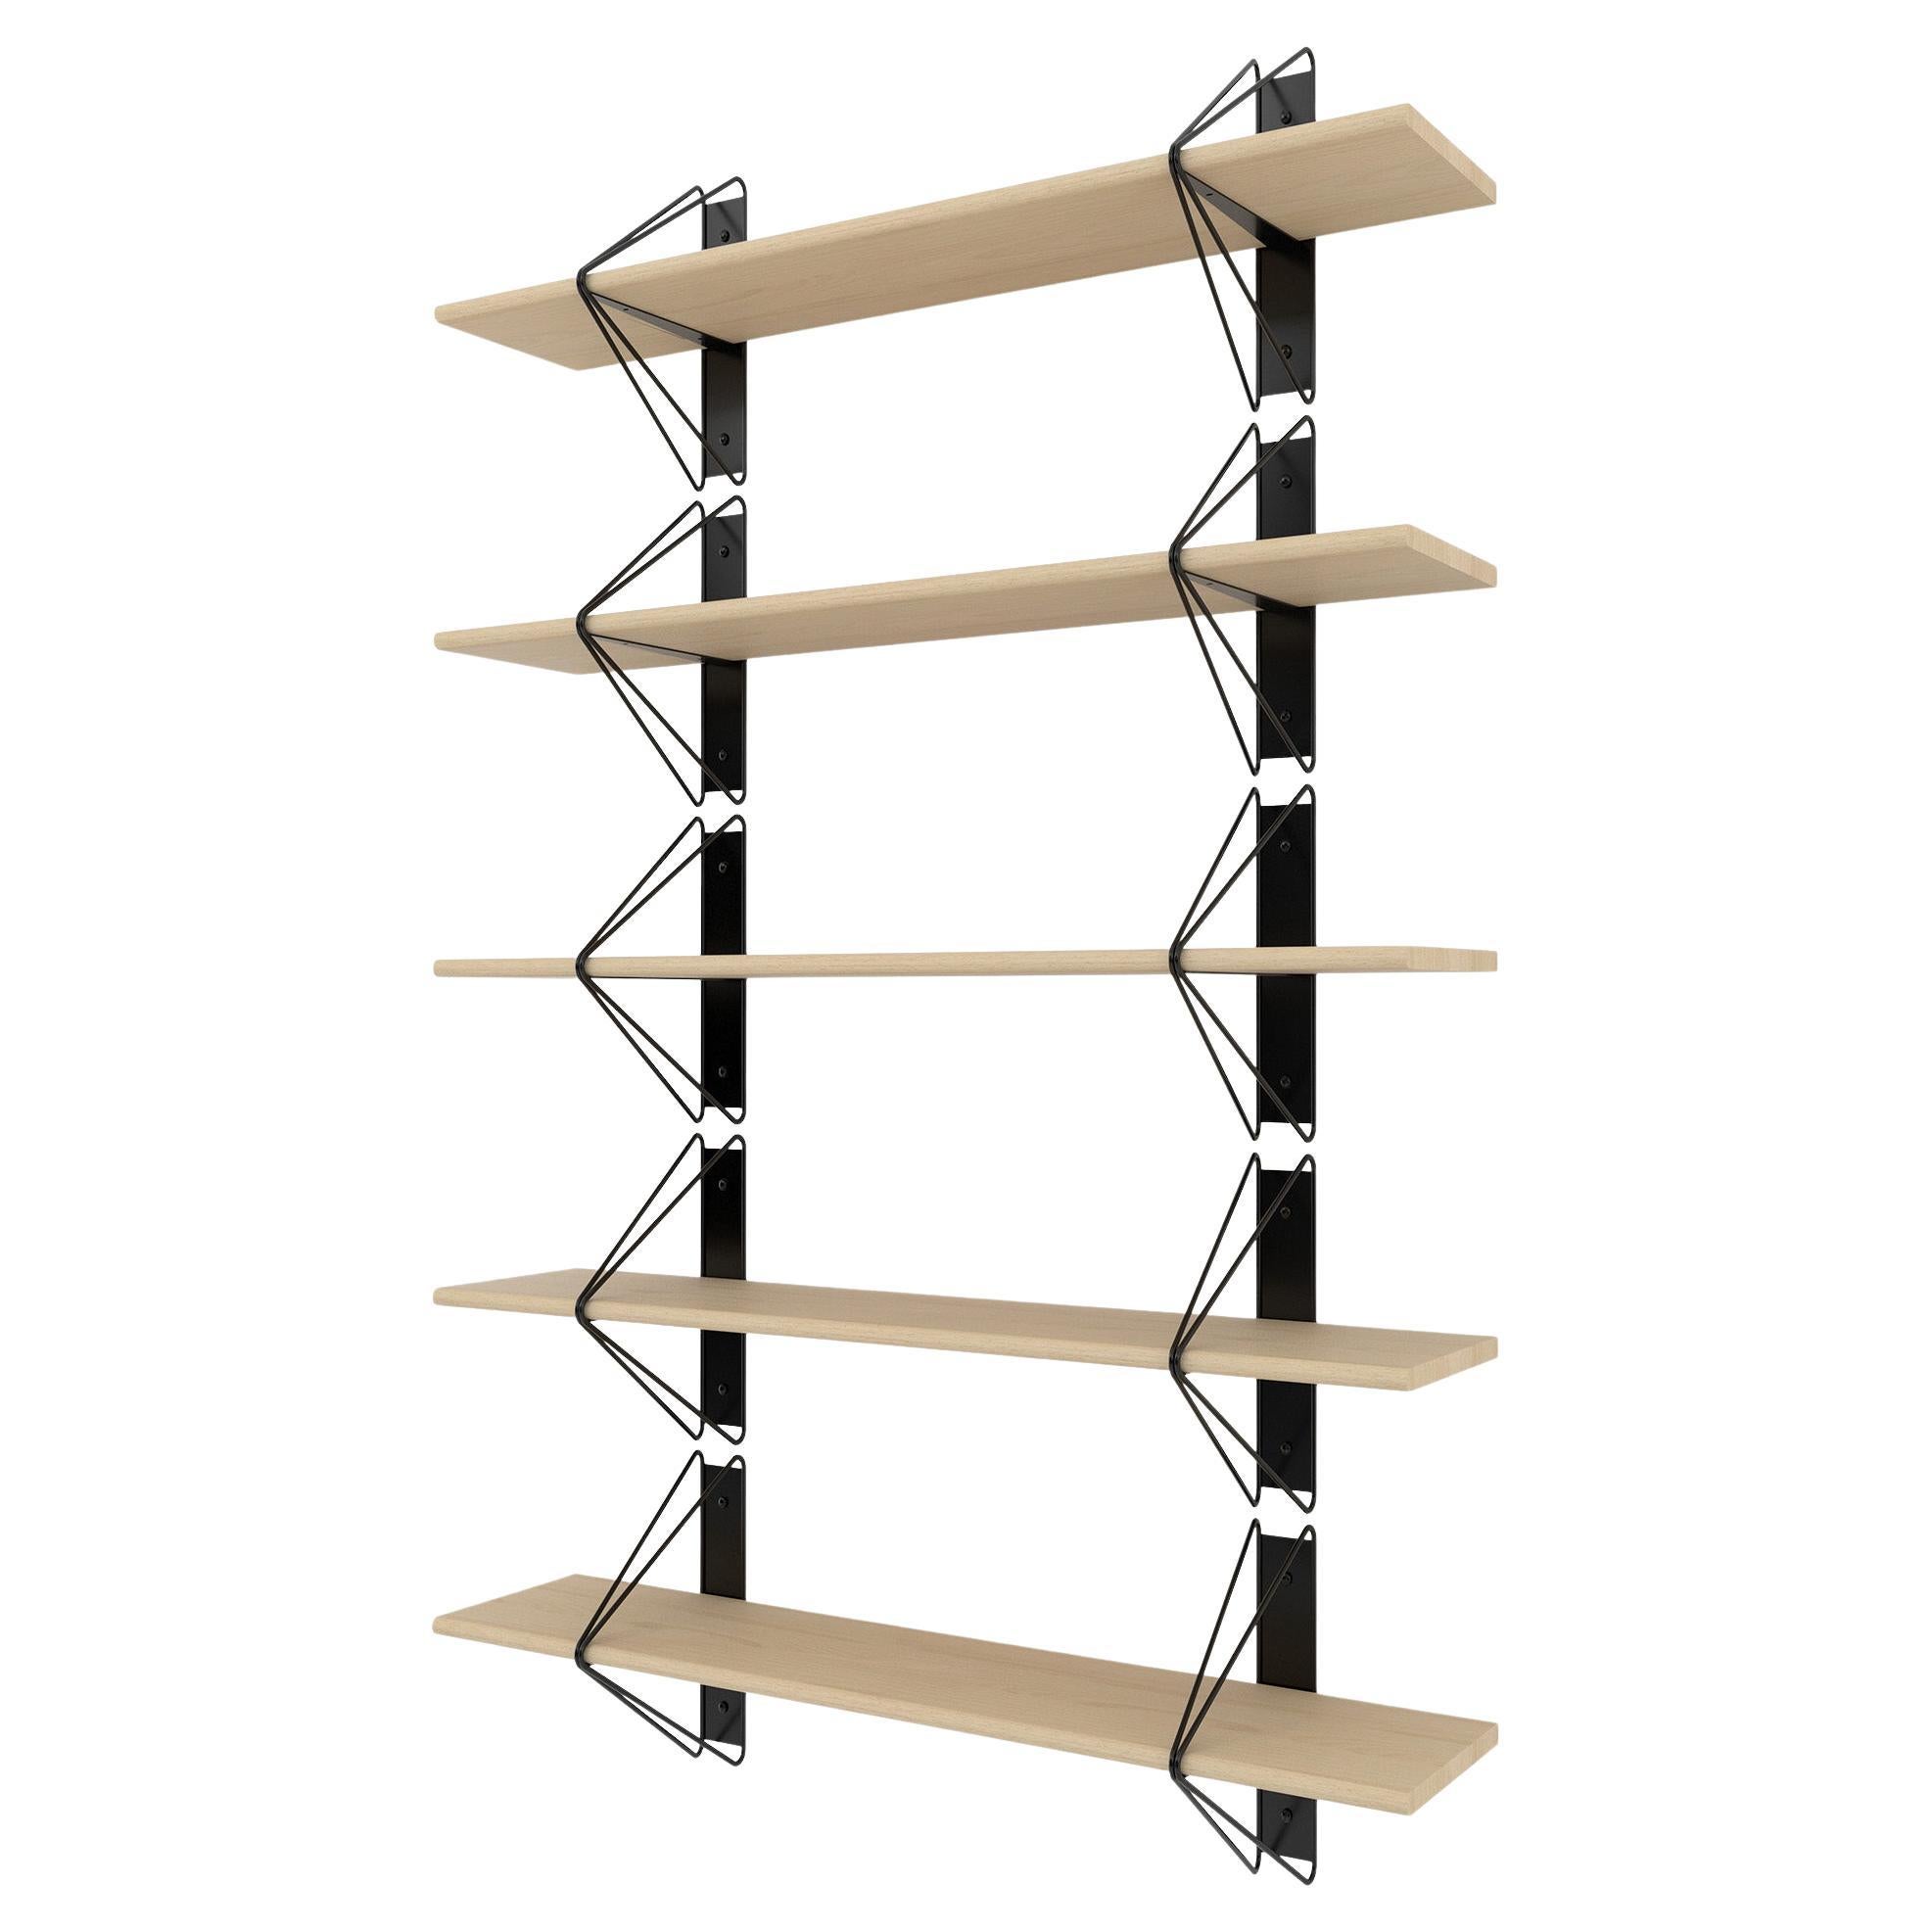 Set of 5 Strut Shelves from Souda, Black and Maple, Made to Order